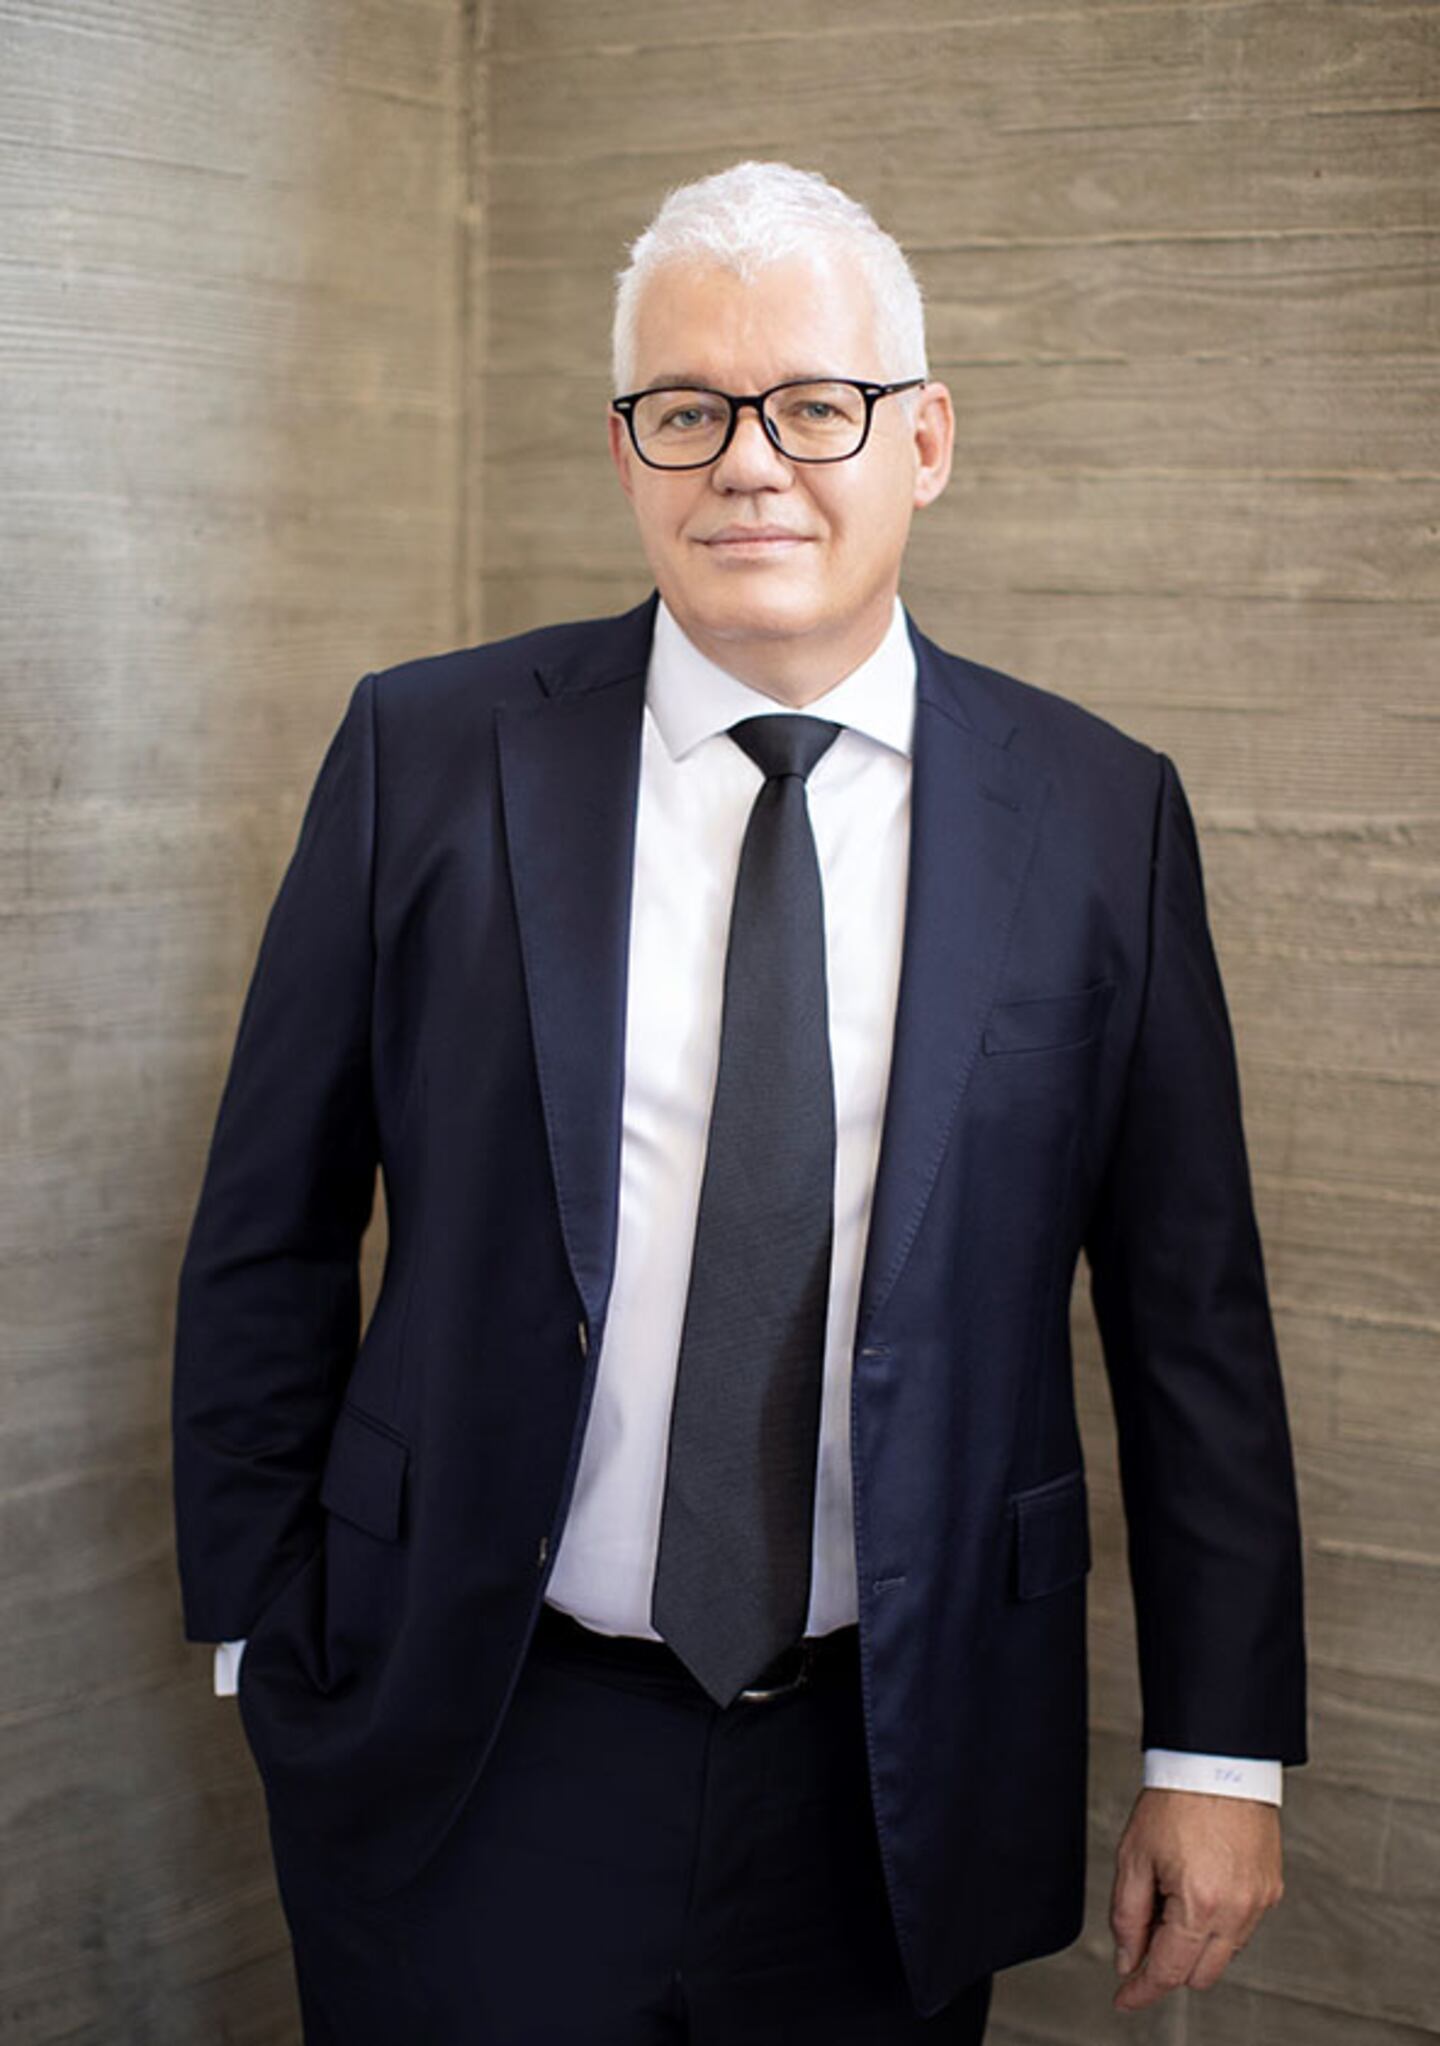 Kering appoints Thierry Marty president of North and Southeast Asia Pacific. Kering.